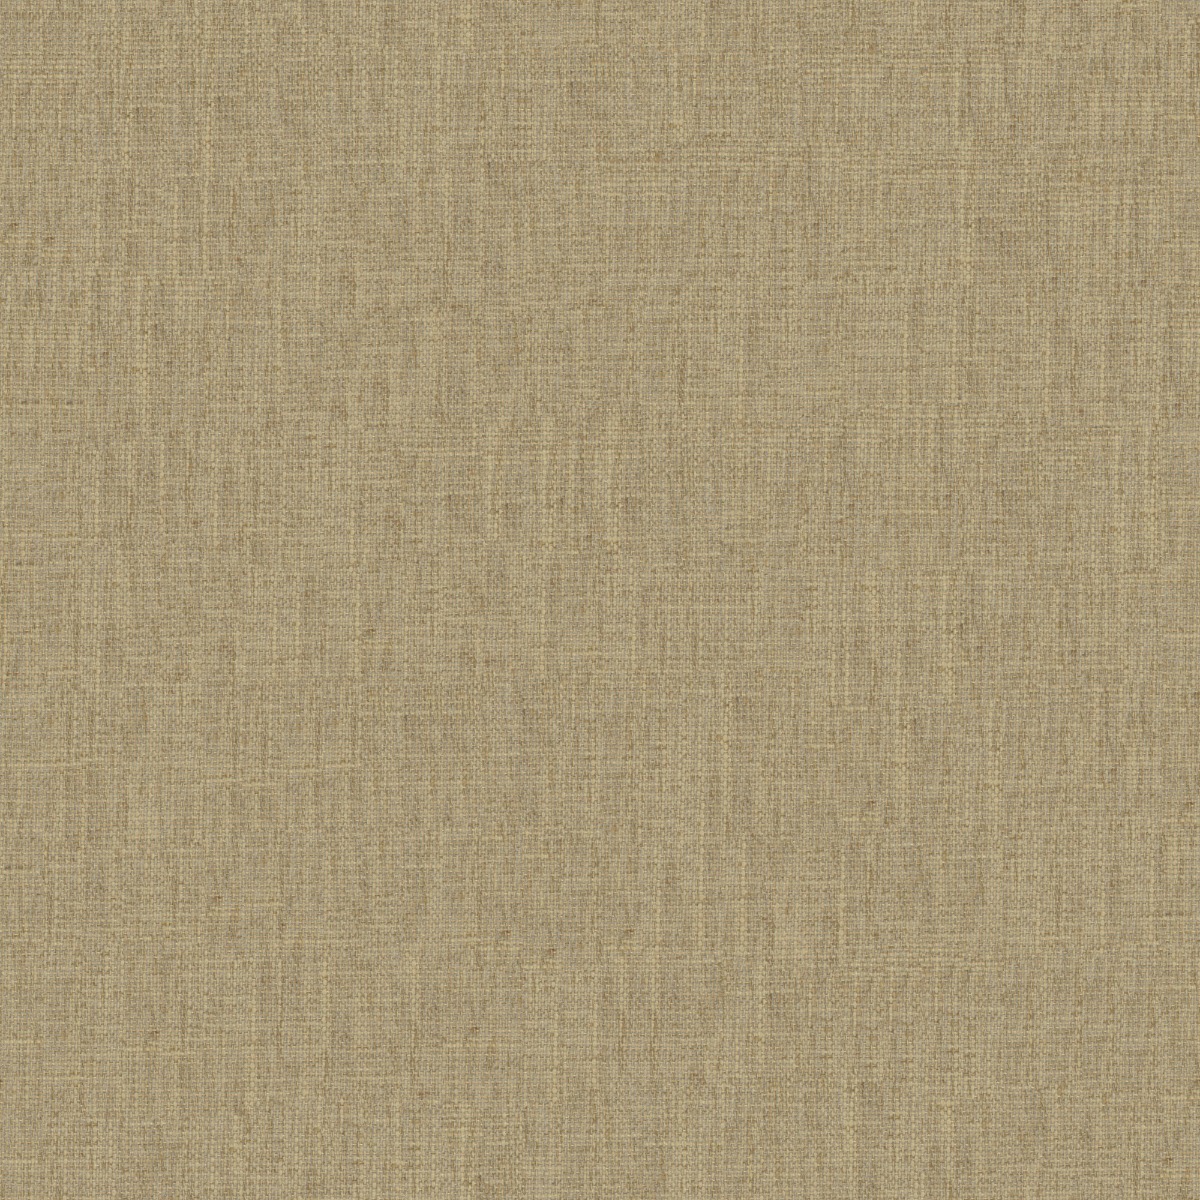 A seamless fabric texture with plain natural blackout units arranged in a None pattern